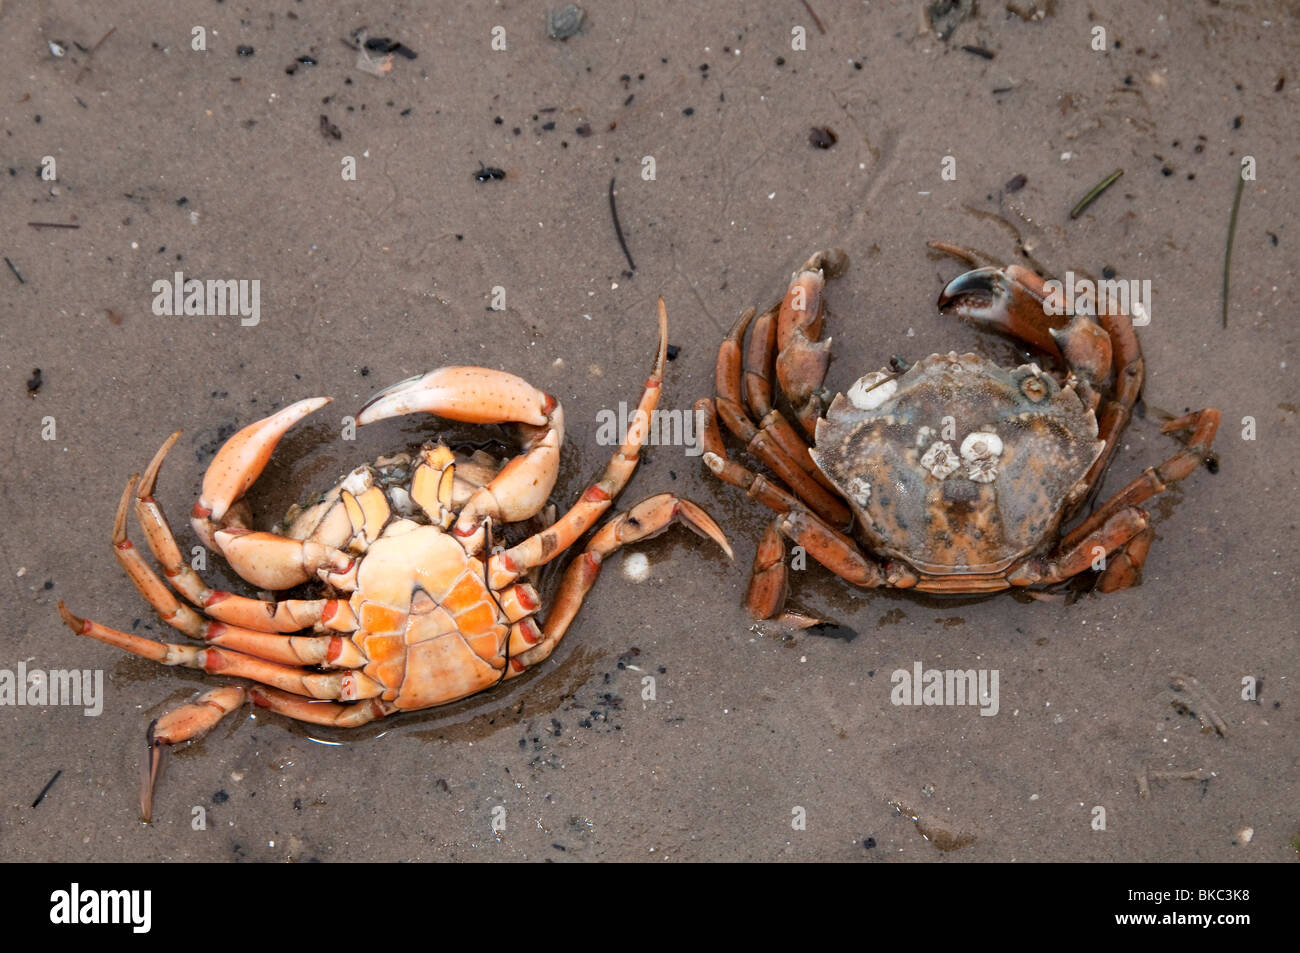 Green Shore Crab, Green Crab,  (Carcinus maenas). Two individuals on sand, one on its belly, the other on its back. Stock Photo